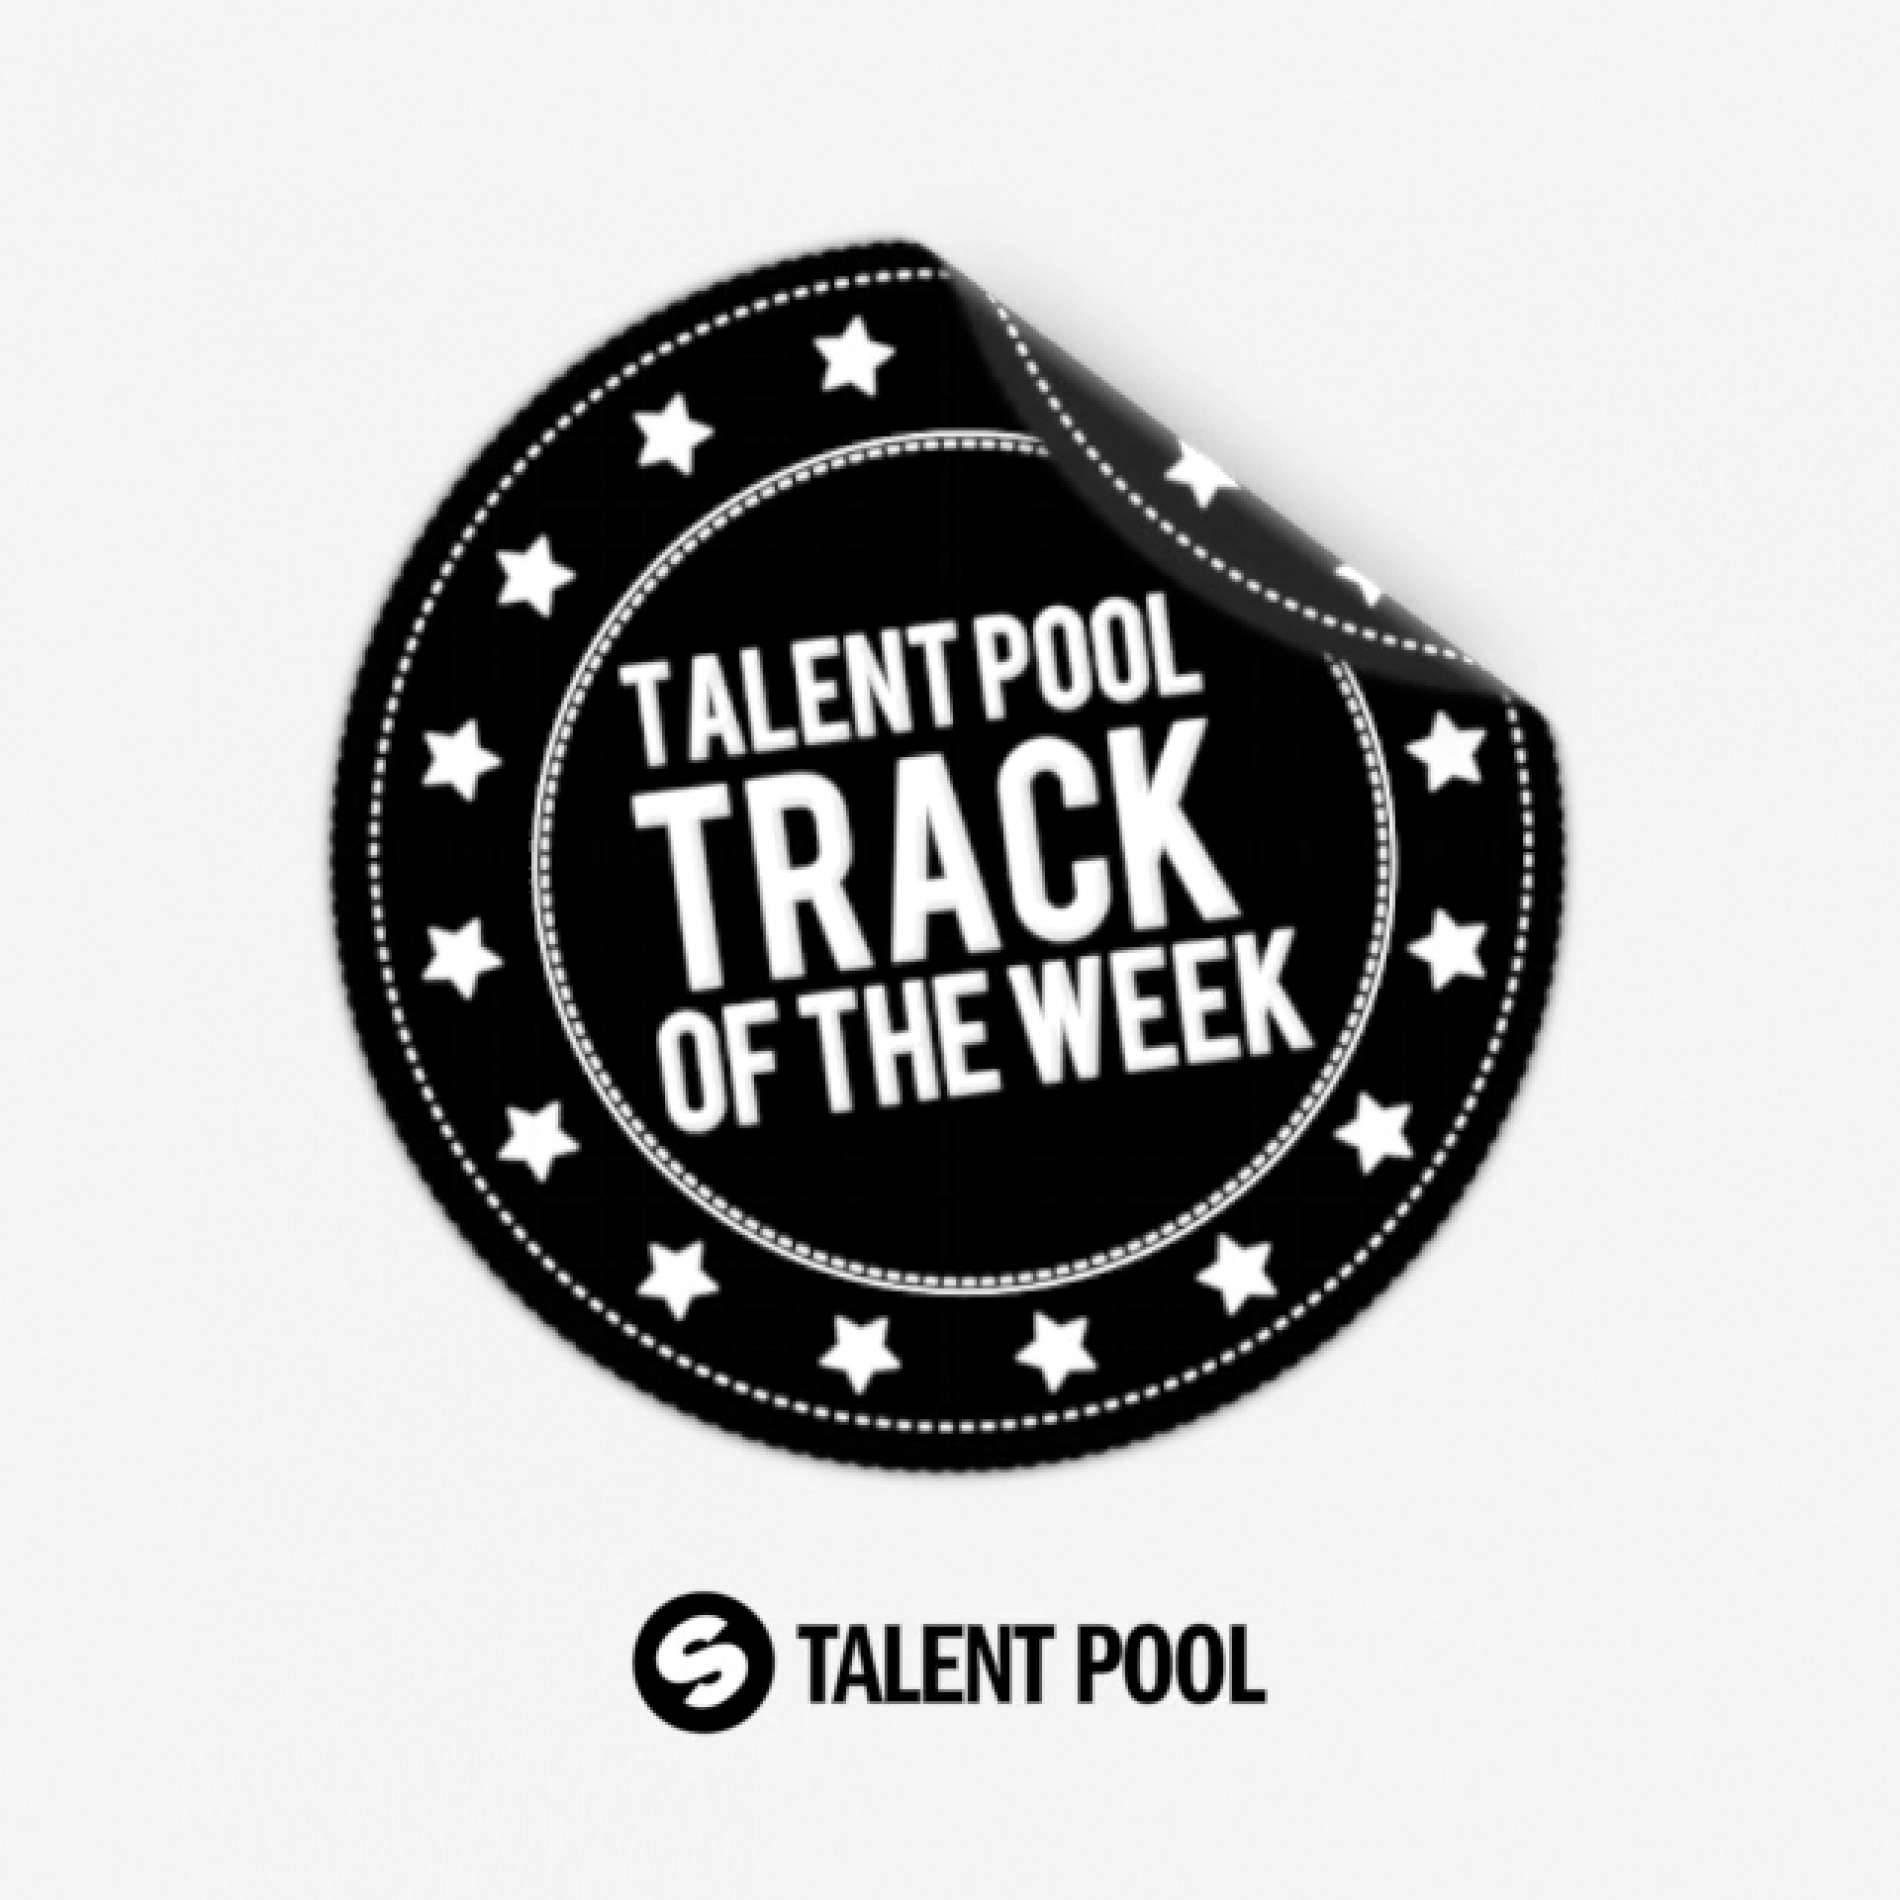 Endego delivers 'Track Of The Week'